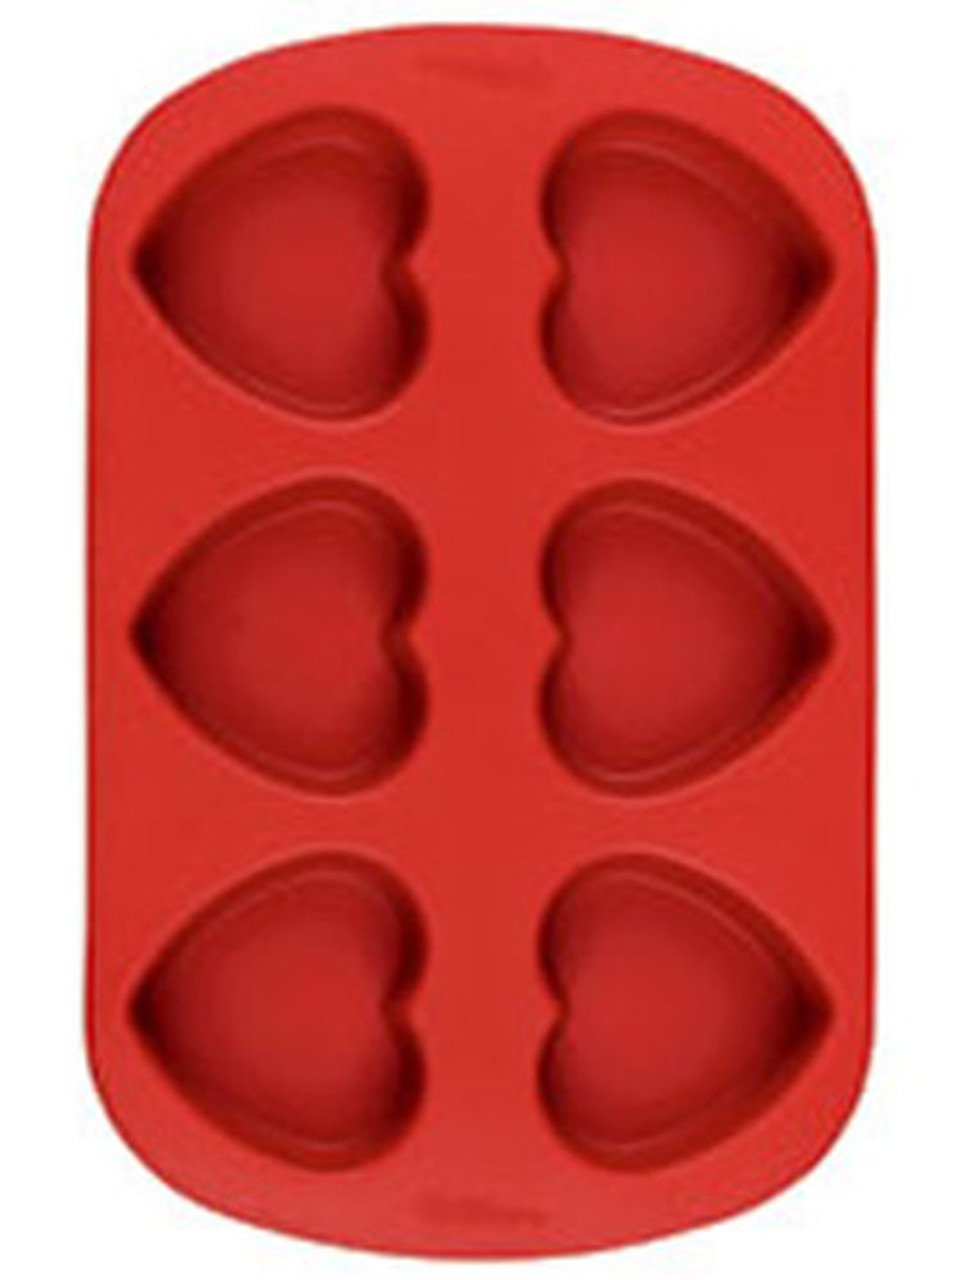 Wilton Mini Silicone Heart Mold, 6-Cavity Silicone Mold for Heart Shaped  Cookies and Candy, Red